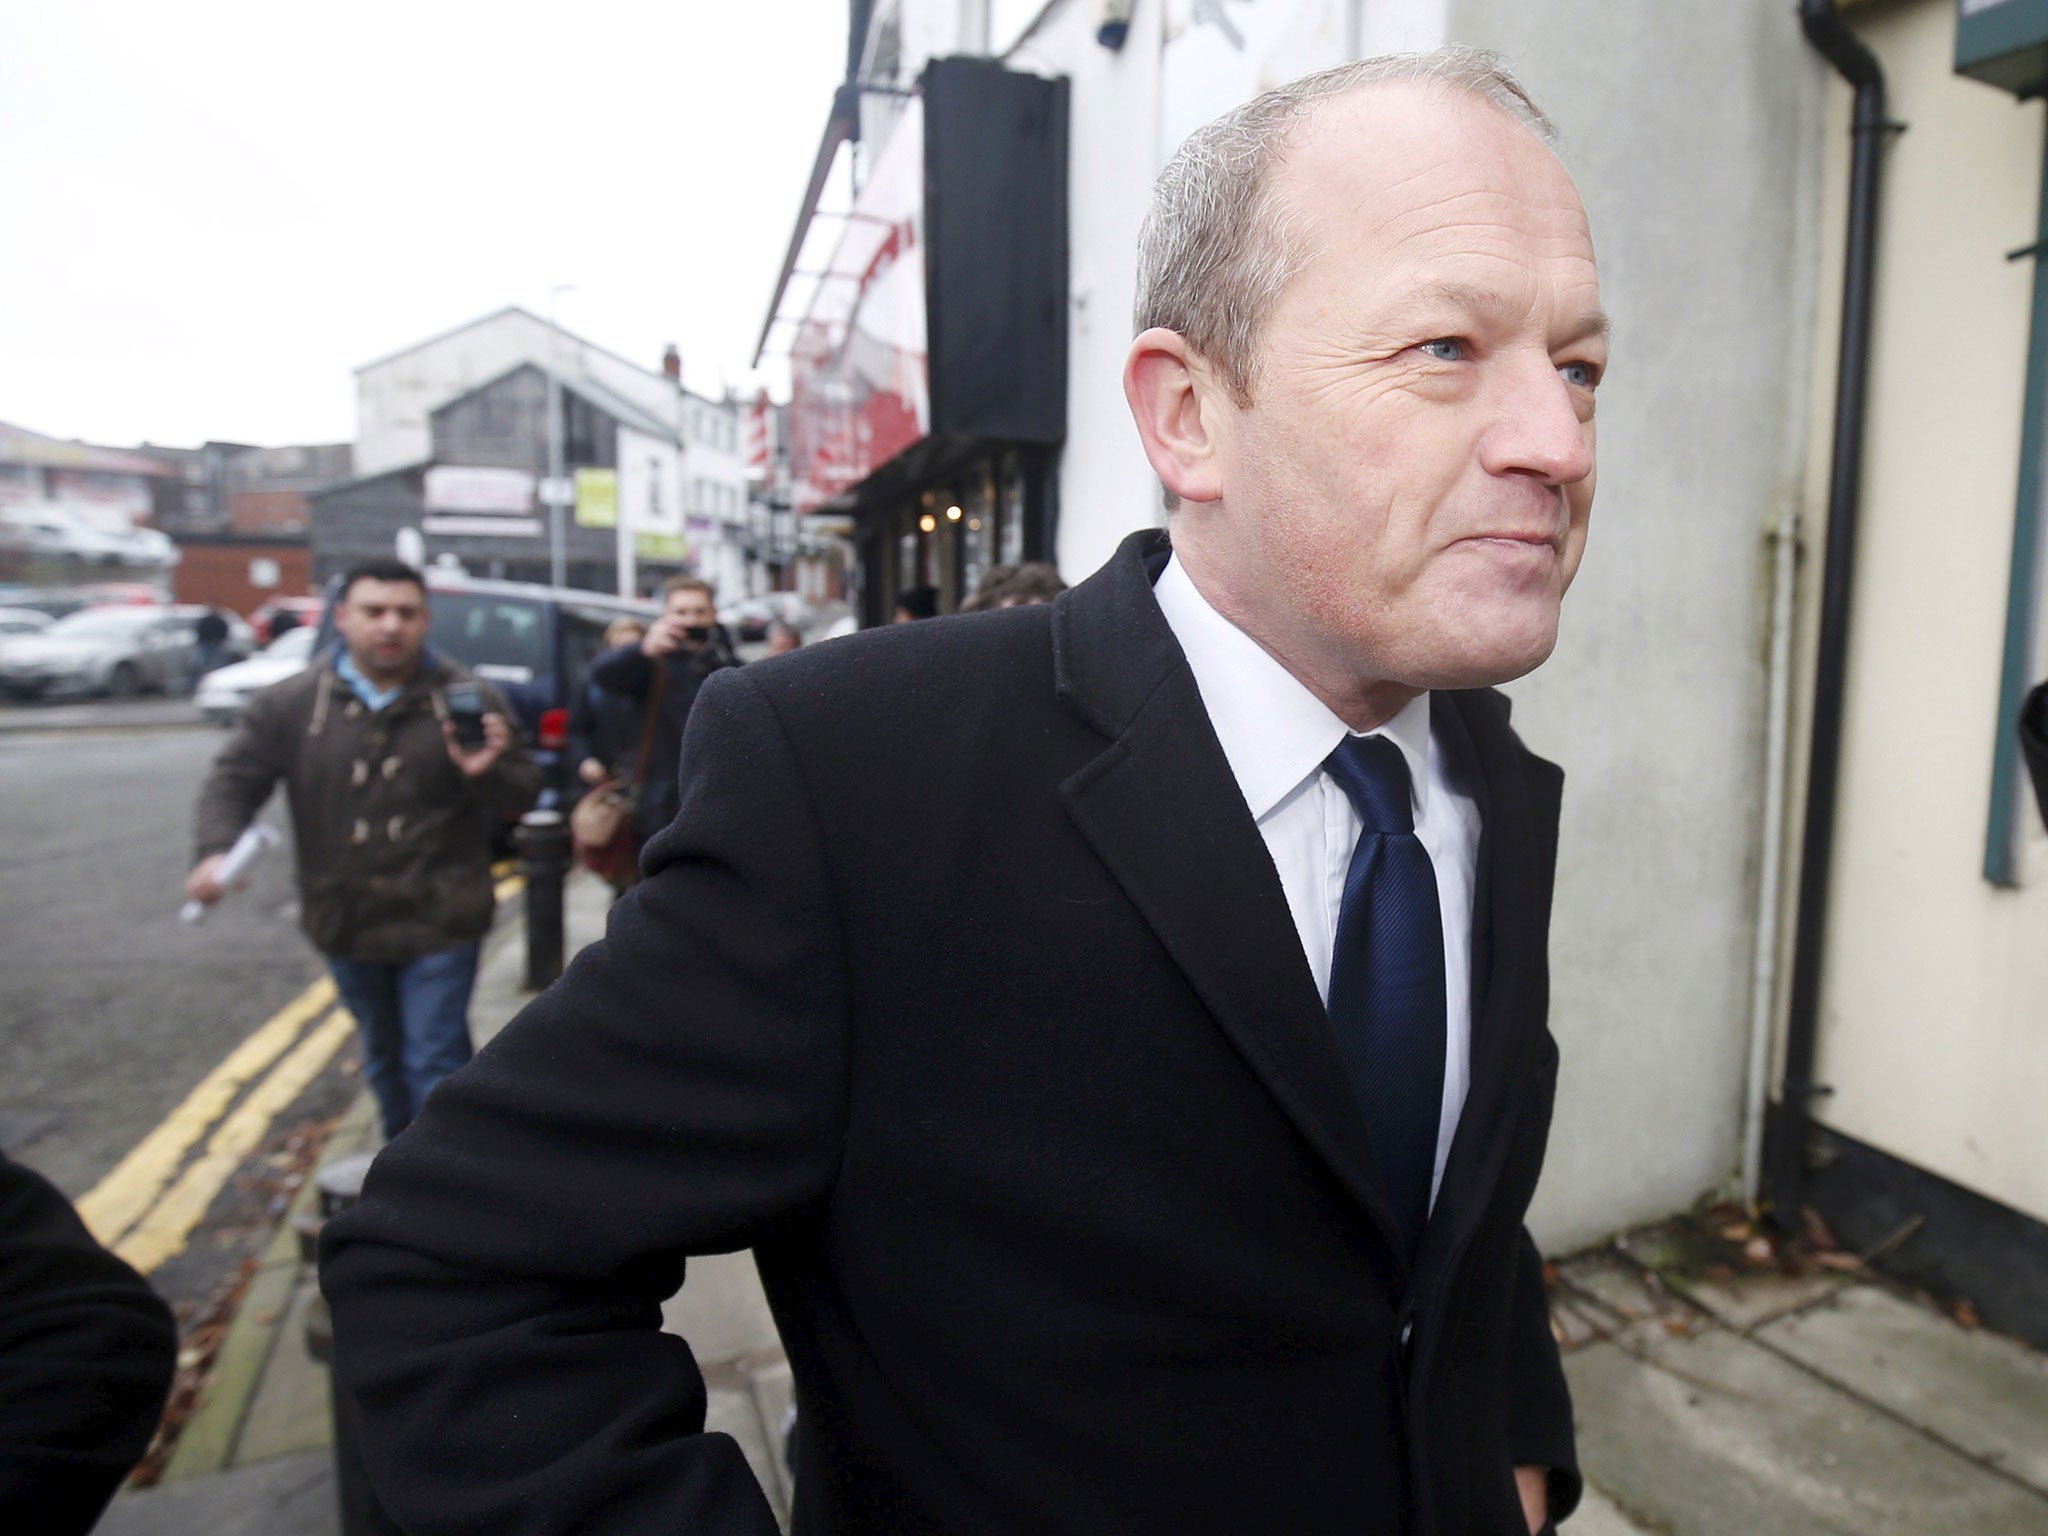 Danczuk is currently suspended by his party